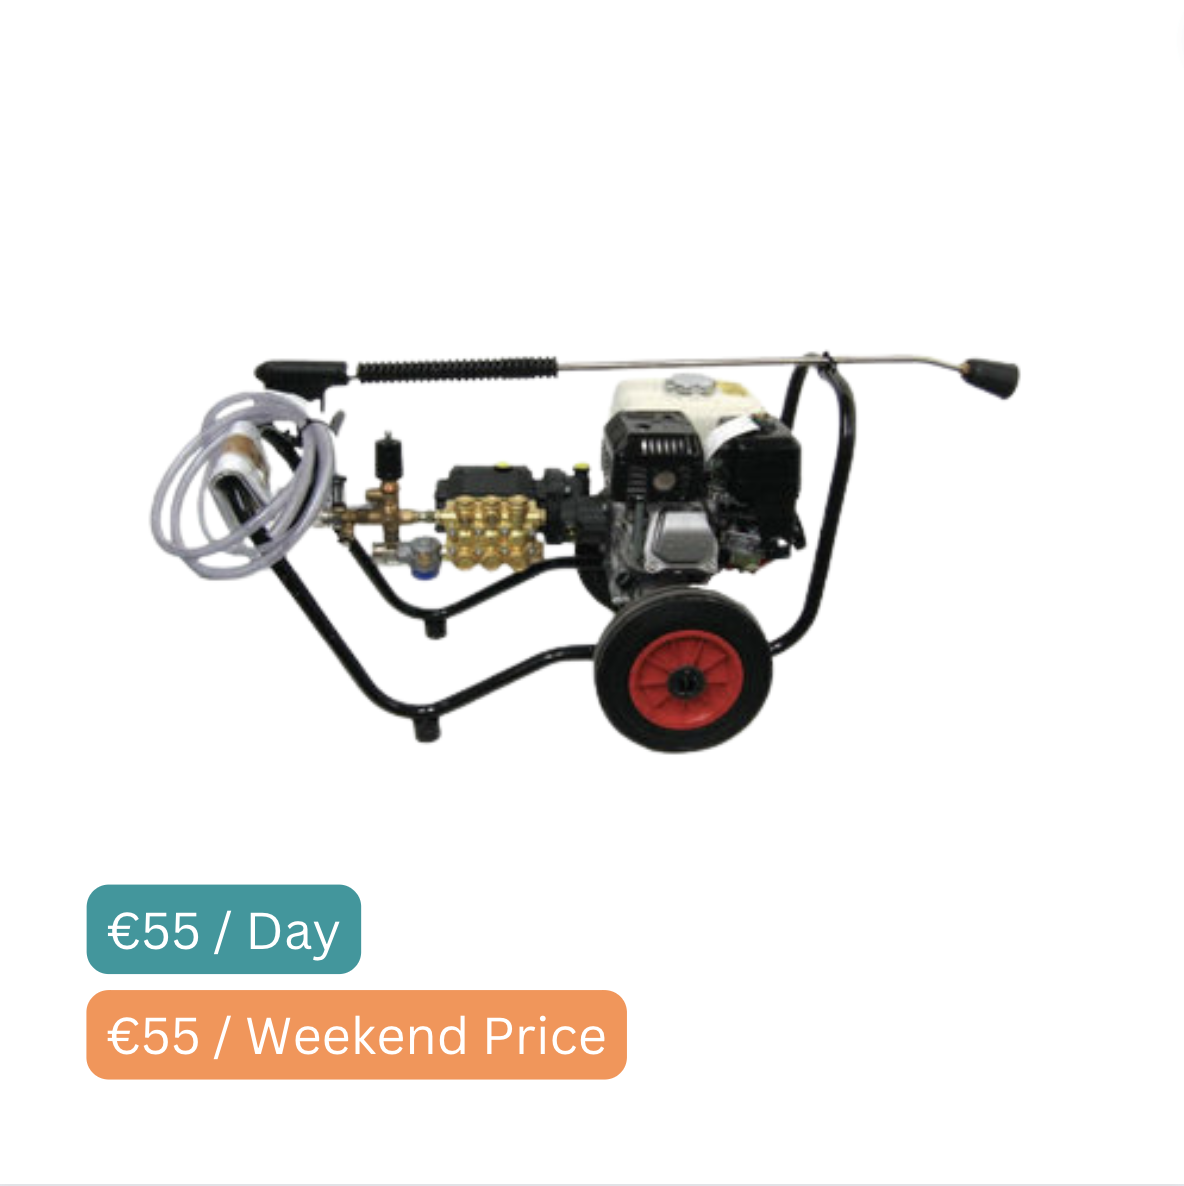 2200 Petrol PSI Power Washer -  Hire Offer 